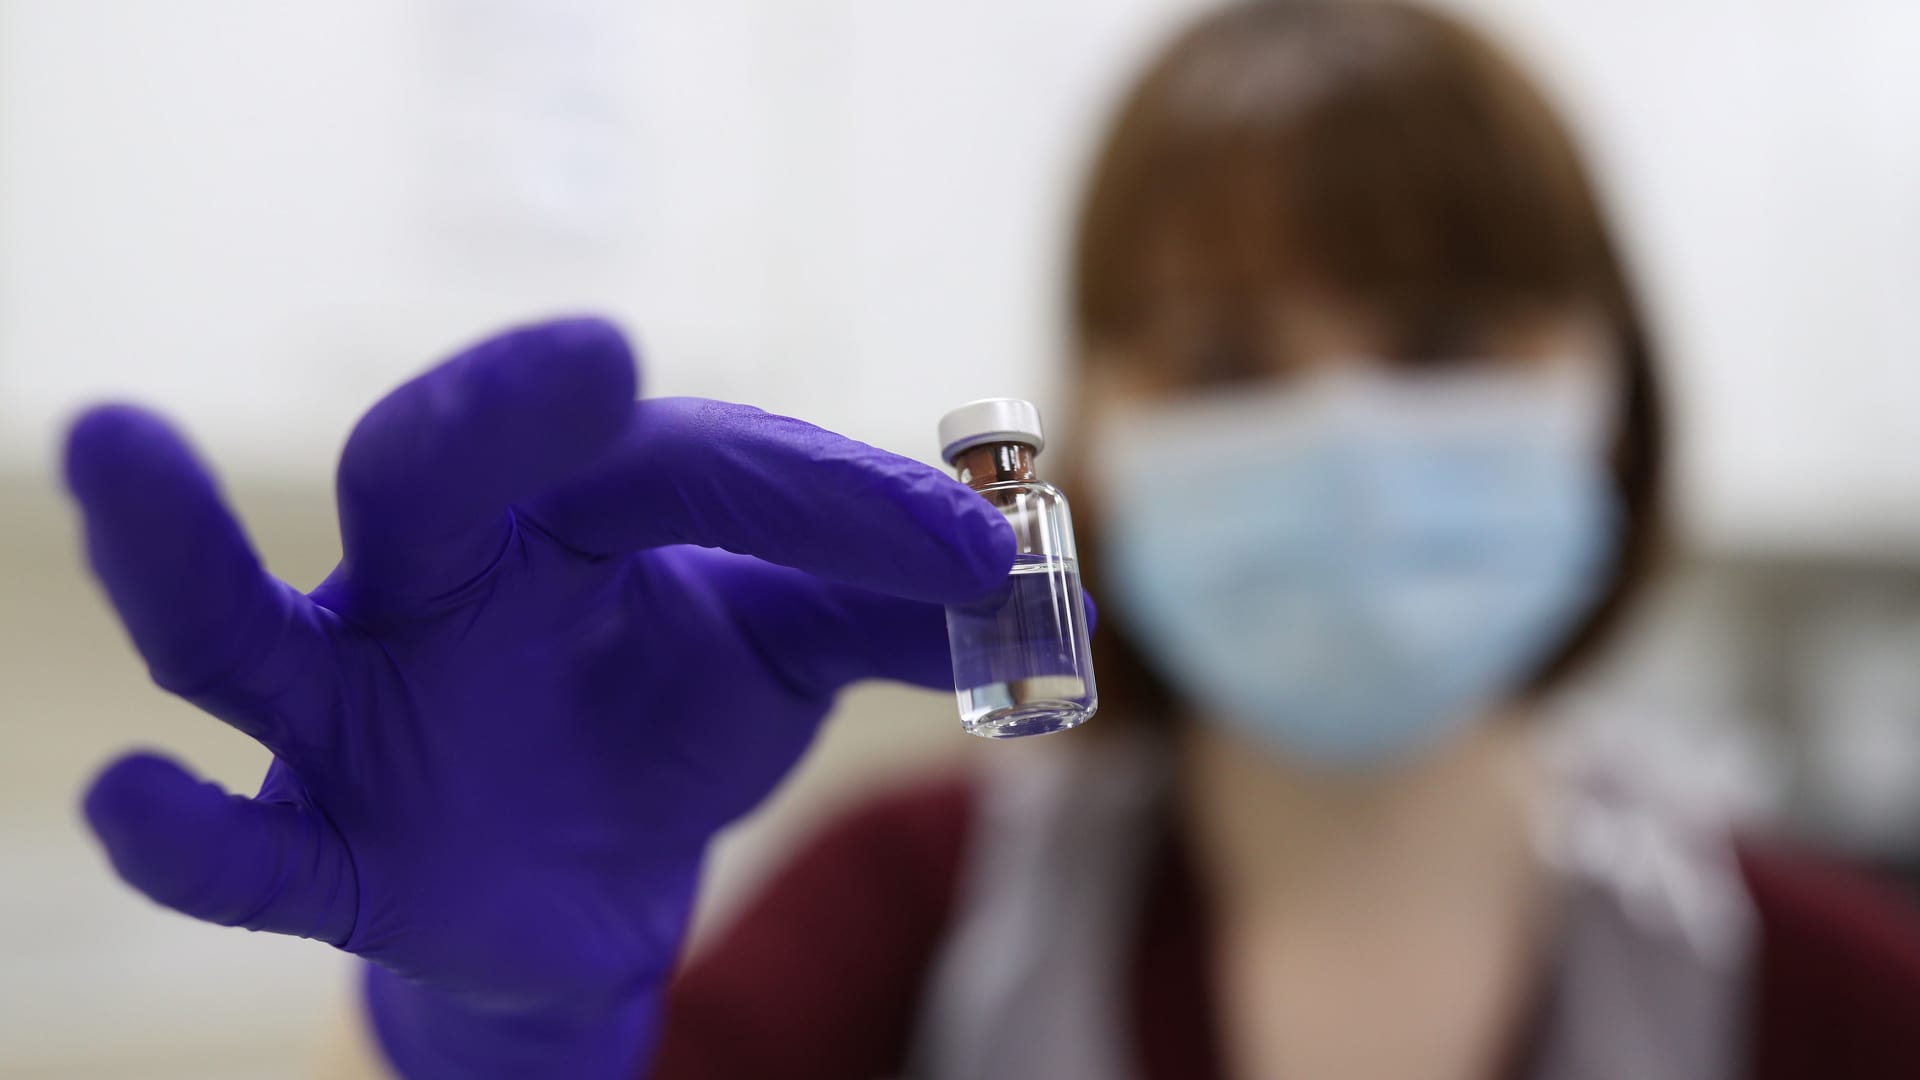 An NHS pharmacy technician at the Royal Free Hospital, London, simulates the preparation of the Pfizer vaccine to support staff training ahead of the rollout, on December 5, 2020 in London, England.